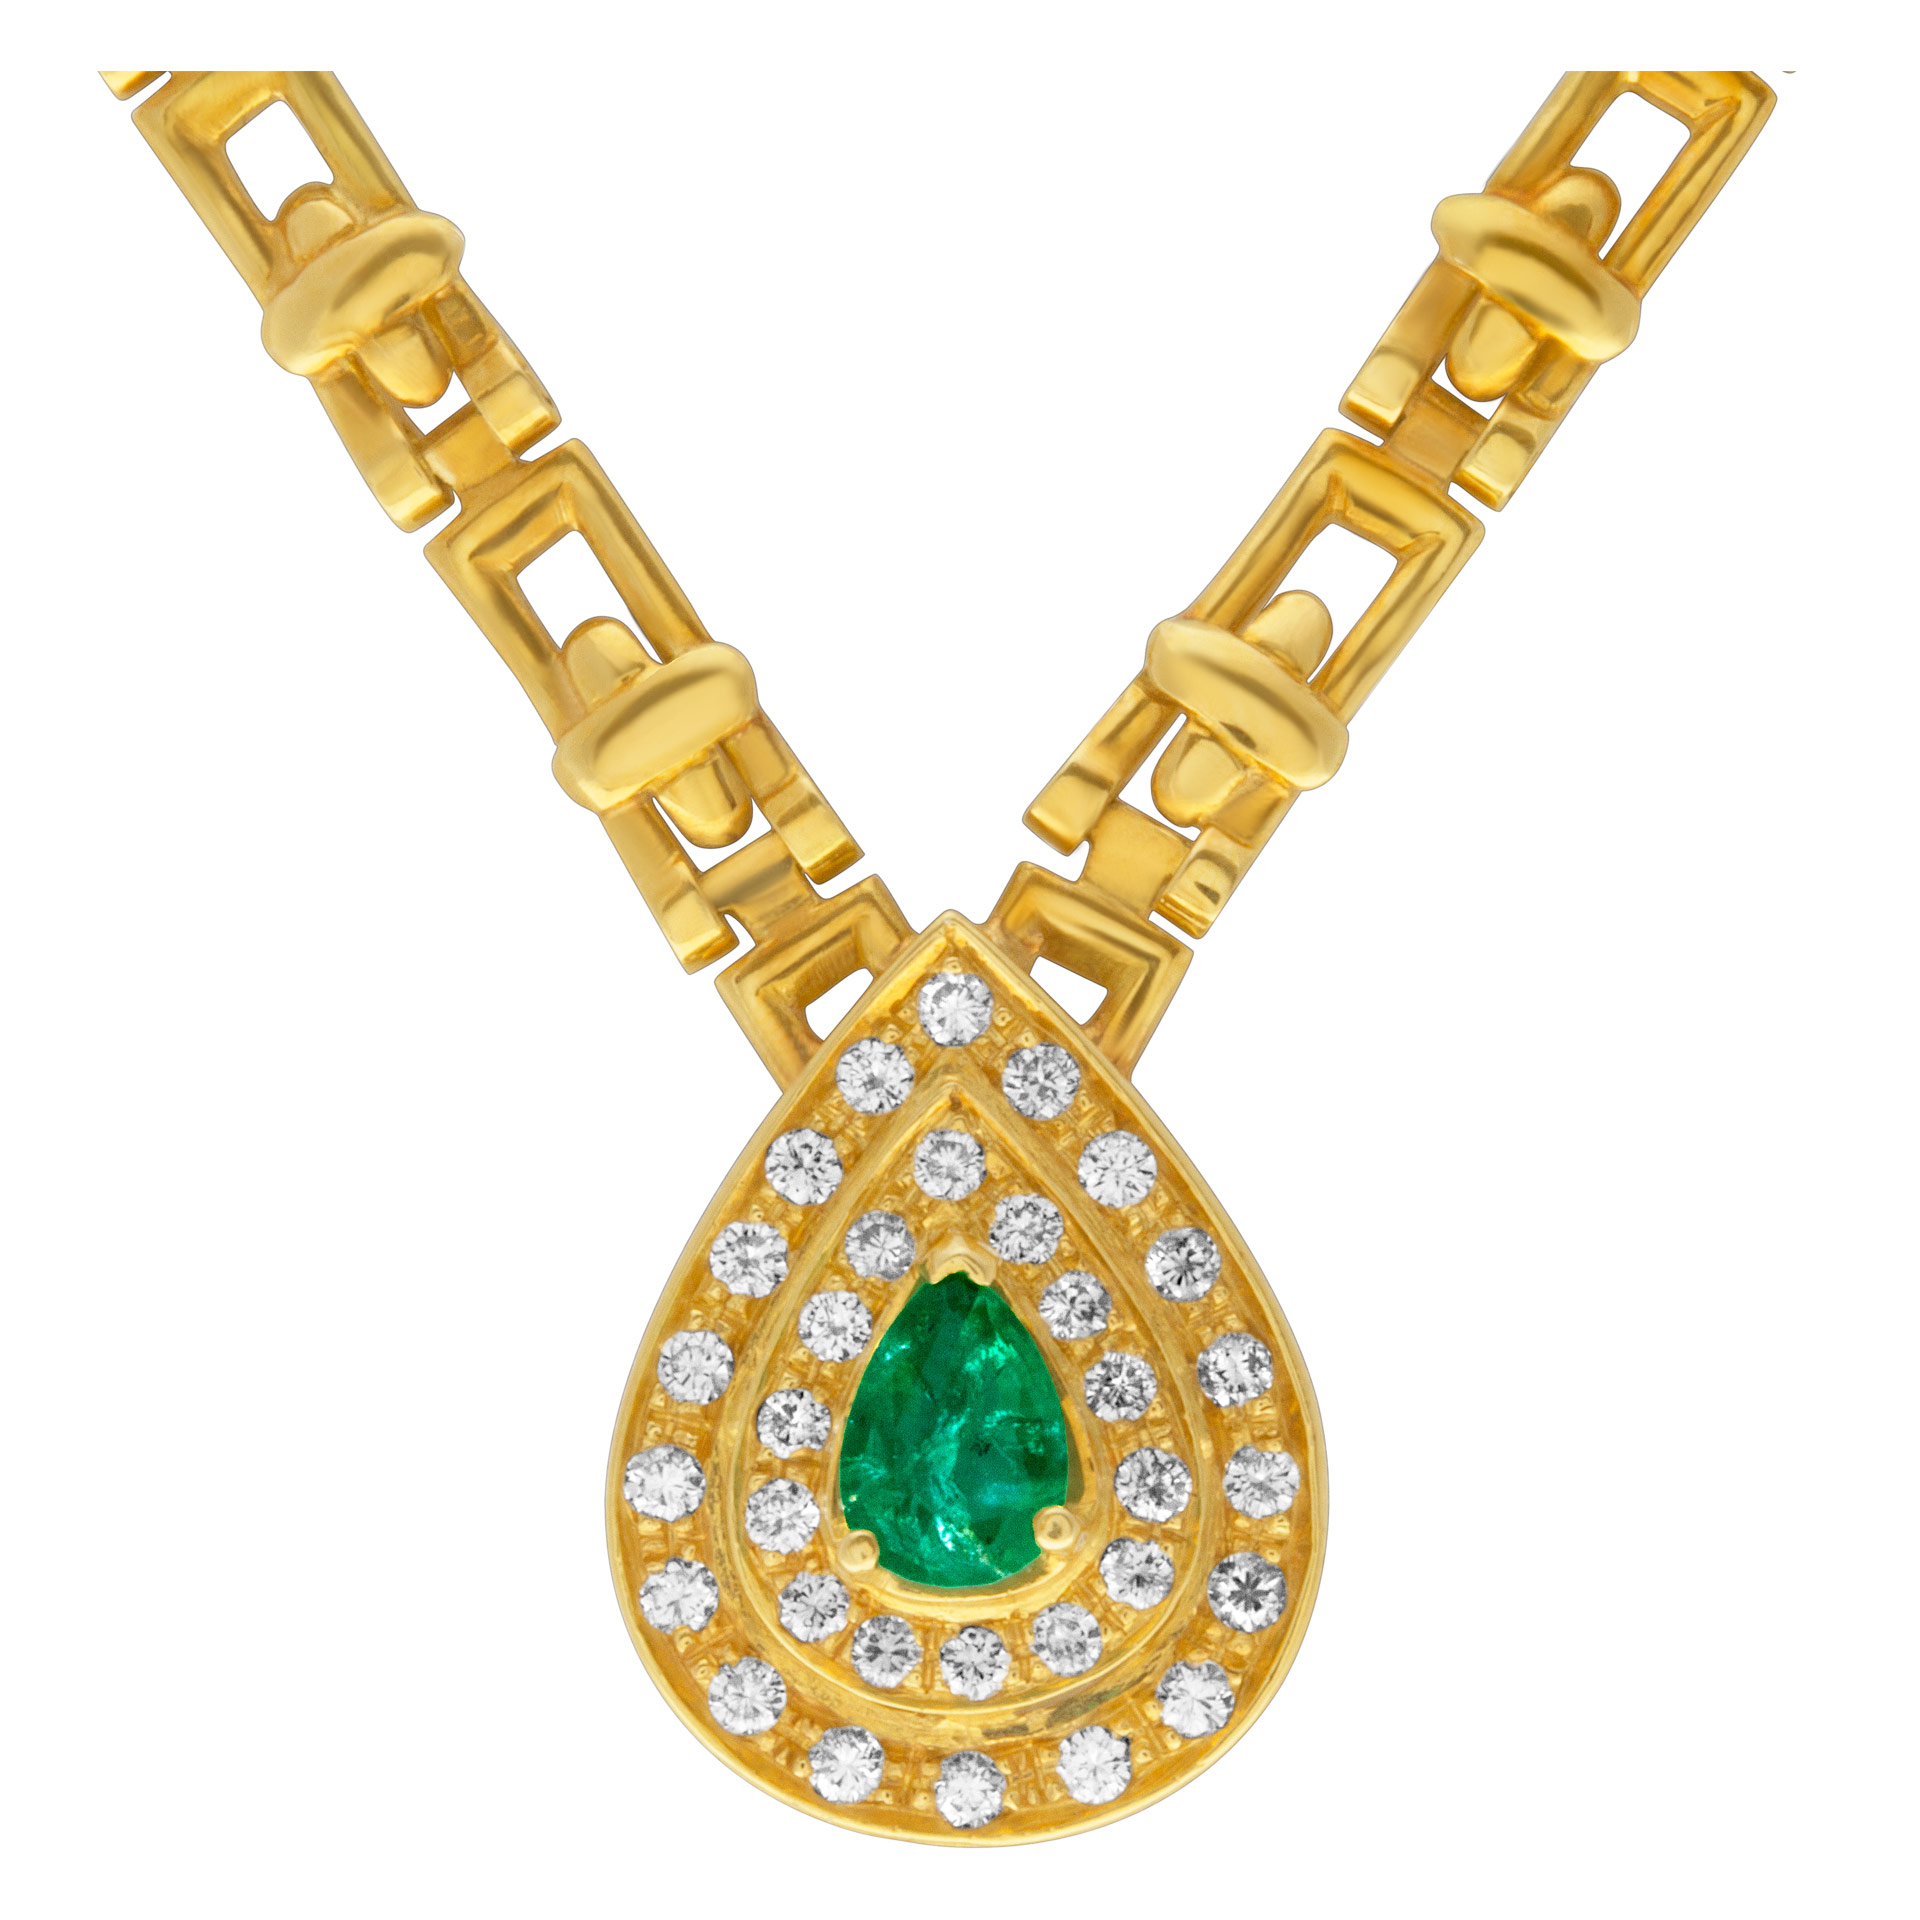 Emerald necklace with diamond accents in 18k yellow gold